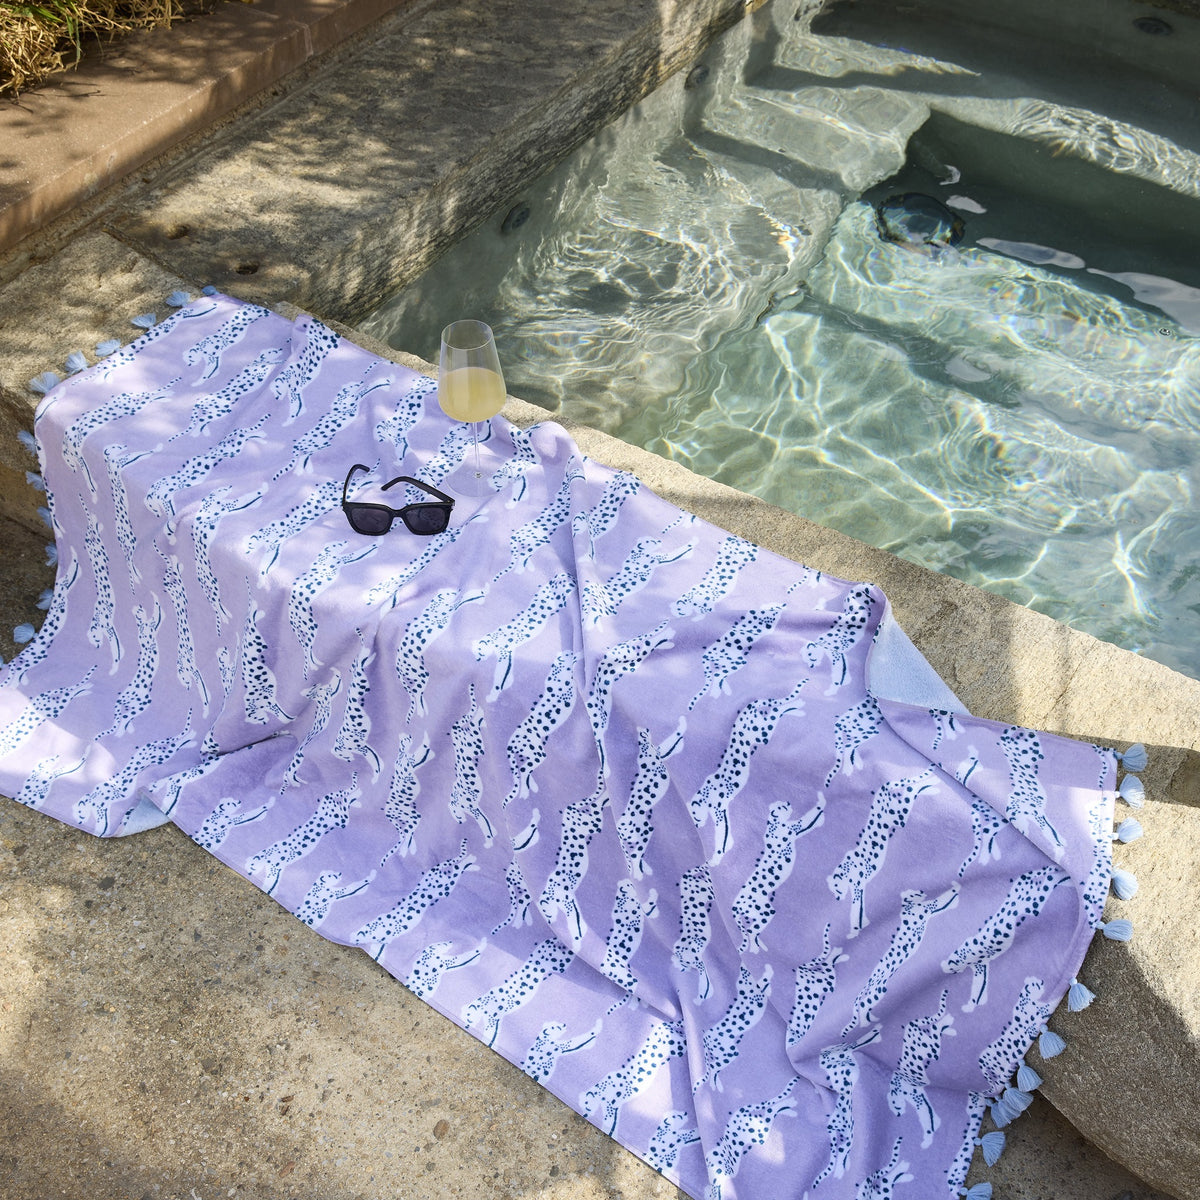 Matouk Leaping Leopard Beach Towels in Color Lilac Layed Out Beside a Pool